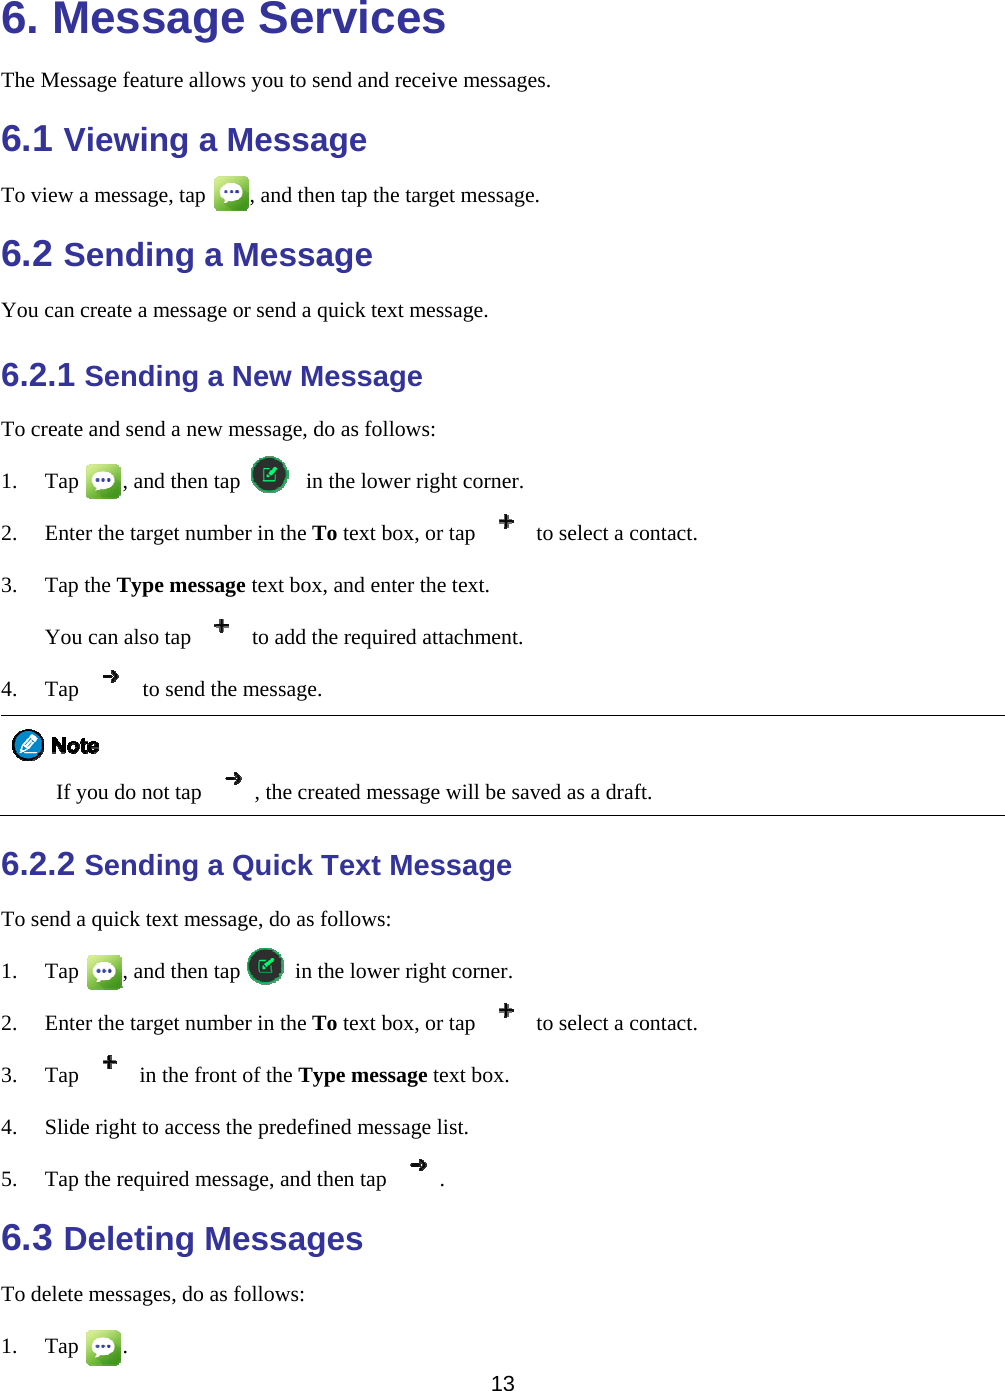   13  6. Message Services The Message feature allows you to send and receive messages. 6.1 Viewing a Message To view a message, tap        , and then tap the target message. 6.2 Sending a Message You can create a message or send a quick text message. 6.2.1 Sending a New Message To create and send a new message, do as follows: 1. Tap    , and then tap      in the lower right corner. 2. Enter the target number in the To text box, or tap    to select a contact. 3. Tap the Type message text box, and enter the text. You can also tap    to add the required attachment. 4. Tap    to send the message.  If you do not tap  , the created message will be saved as a draft. 6.2.2 Sending a Quick Text Message To send a quick text message, do as follows: 1. Tap    , and then tap     in the lower right corner. 2. Enter the target number in the To text box, or tap    to select a contact. 3. Tap    in the front of the Type message text box. 4. Slide right to access the predefined message list. 5. Tap the required message, and then tap  . 6.3 Deleting Messages To delete messages, do as follows: 1. Tap    . 